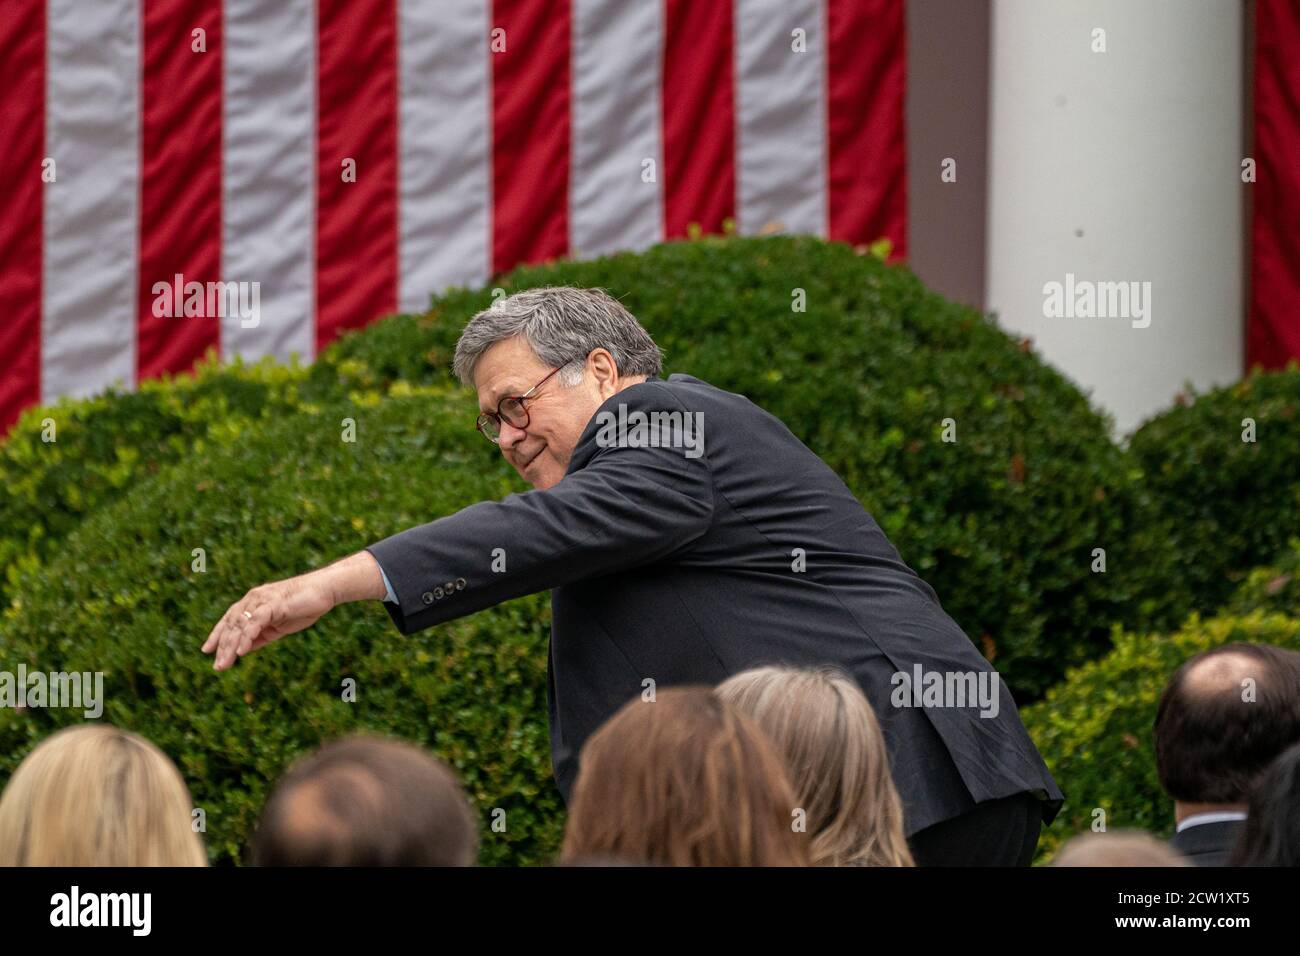 United States Attorney General William P. Barr reaches over to shake somoneÕs hand prior to prior to President Donald Trump making an announcement in the Rose Garden to nominate Judge Amy Coney Barrett for the Supreme Court seat left vacant by Justice Ruth Bader Ginsburg's death last week Sep. 9/26/20, 2020 in Washington DC. The Republican-controlled Senate now has little time if they opt to confirm the nominee ahead of Election Day. (Photo by Photo Ken Cedeno/Sipa USA ) Credit: Sipa USA/Alamy Live News Stock Photo